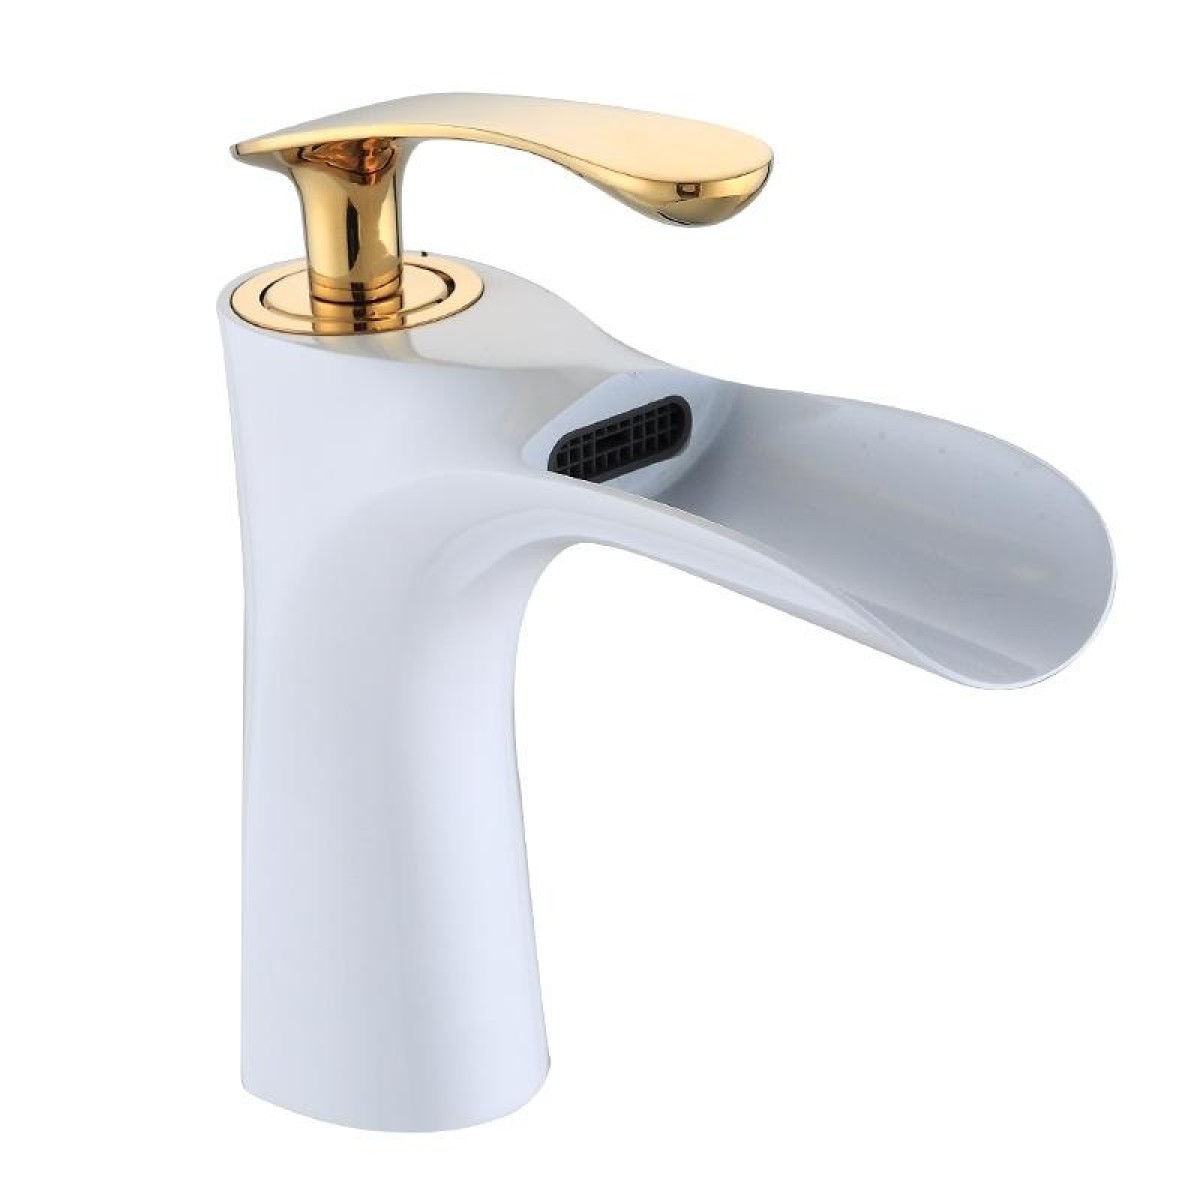 Washbasin All Copper Diamond Hot And Cold Water Faucet(White Gold)